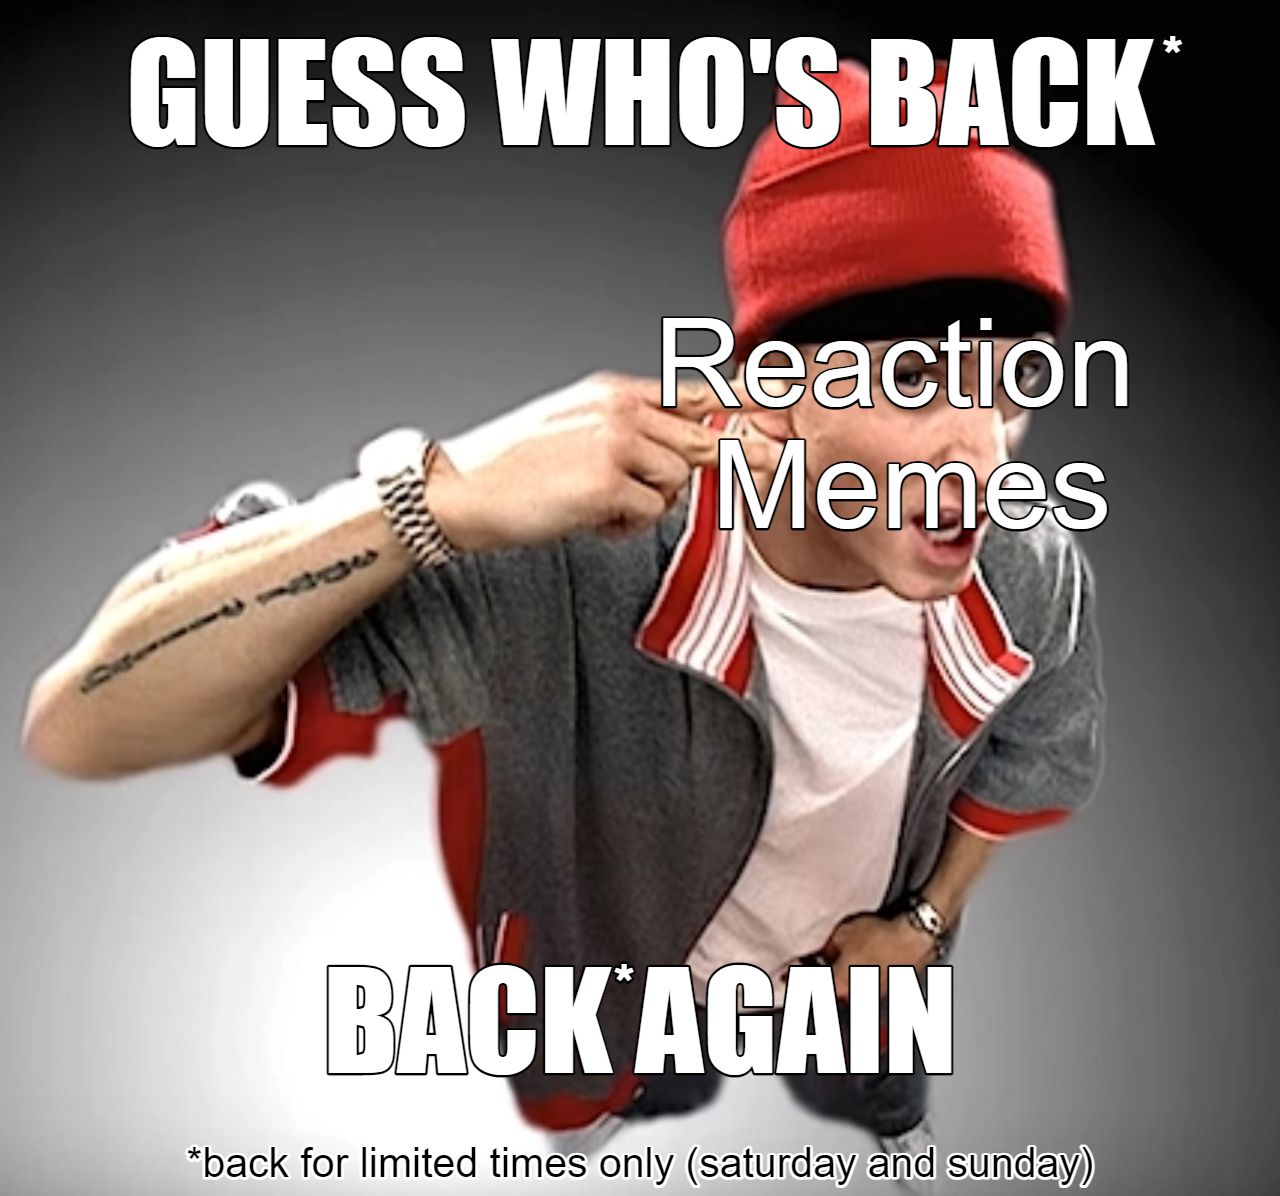 REACTION MEMES ARE BACK